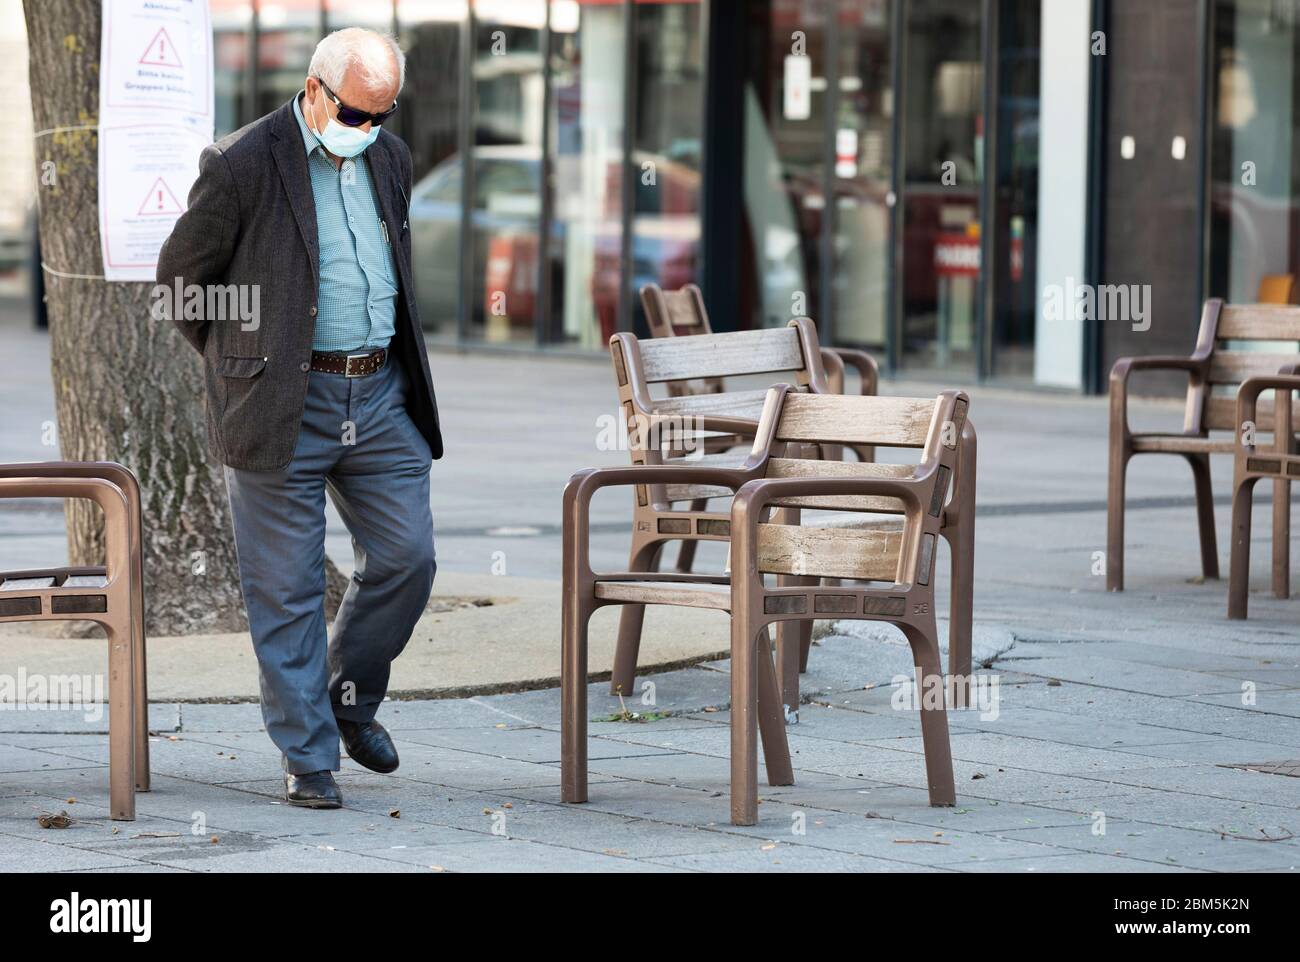 old man with a coronavirus protection mask walking on a square with empty chairs Stock Photo